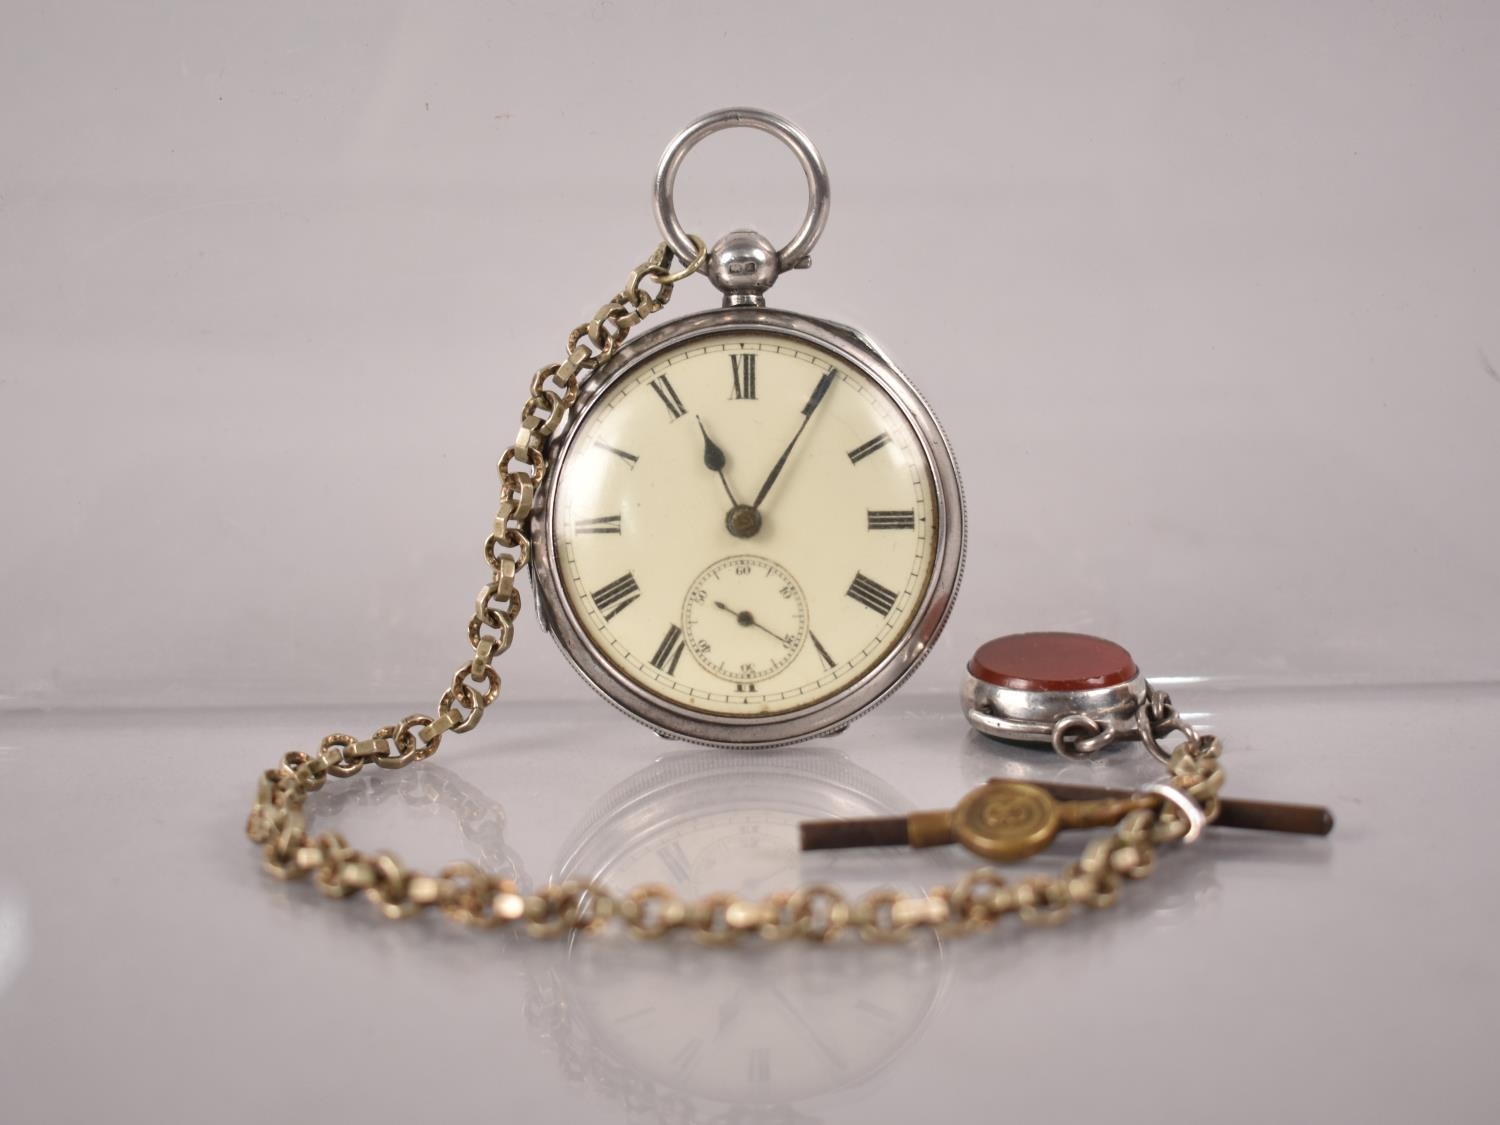 A Silver Open Faced Pocket Watch, Chester 1901, Numbered 550577, White Metal Fancy Link Chain having